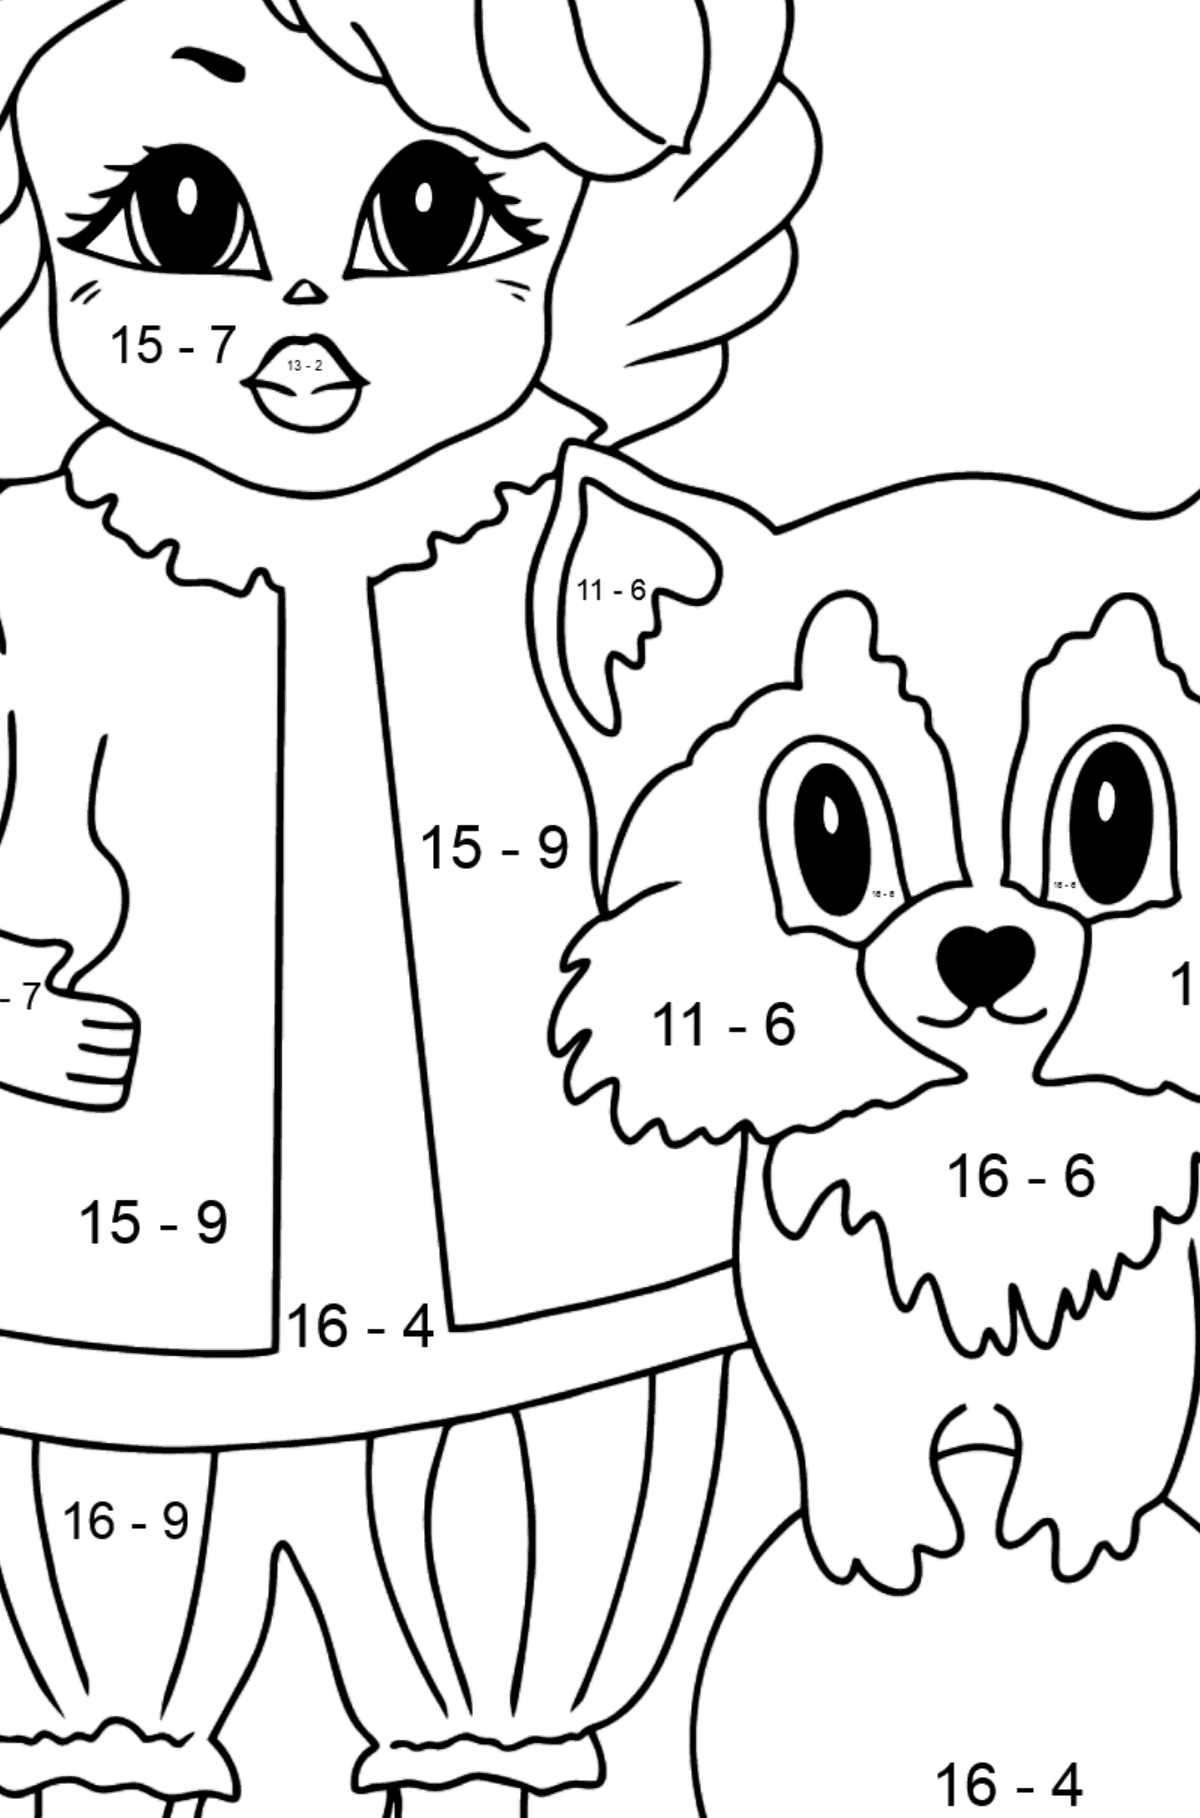 Coloring Picture - A Princess with a Cat and a Racoon - Math Coloring - Subtraction for Kids